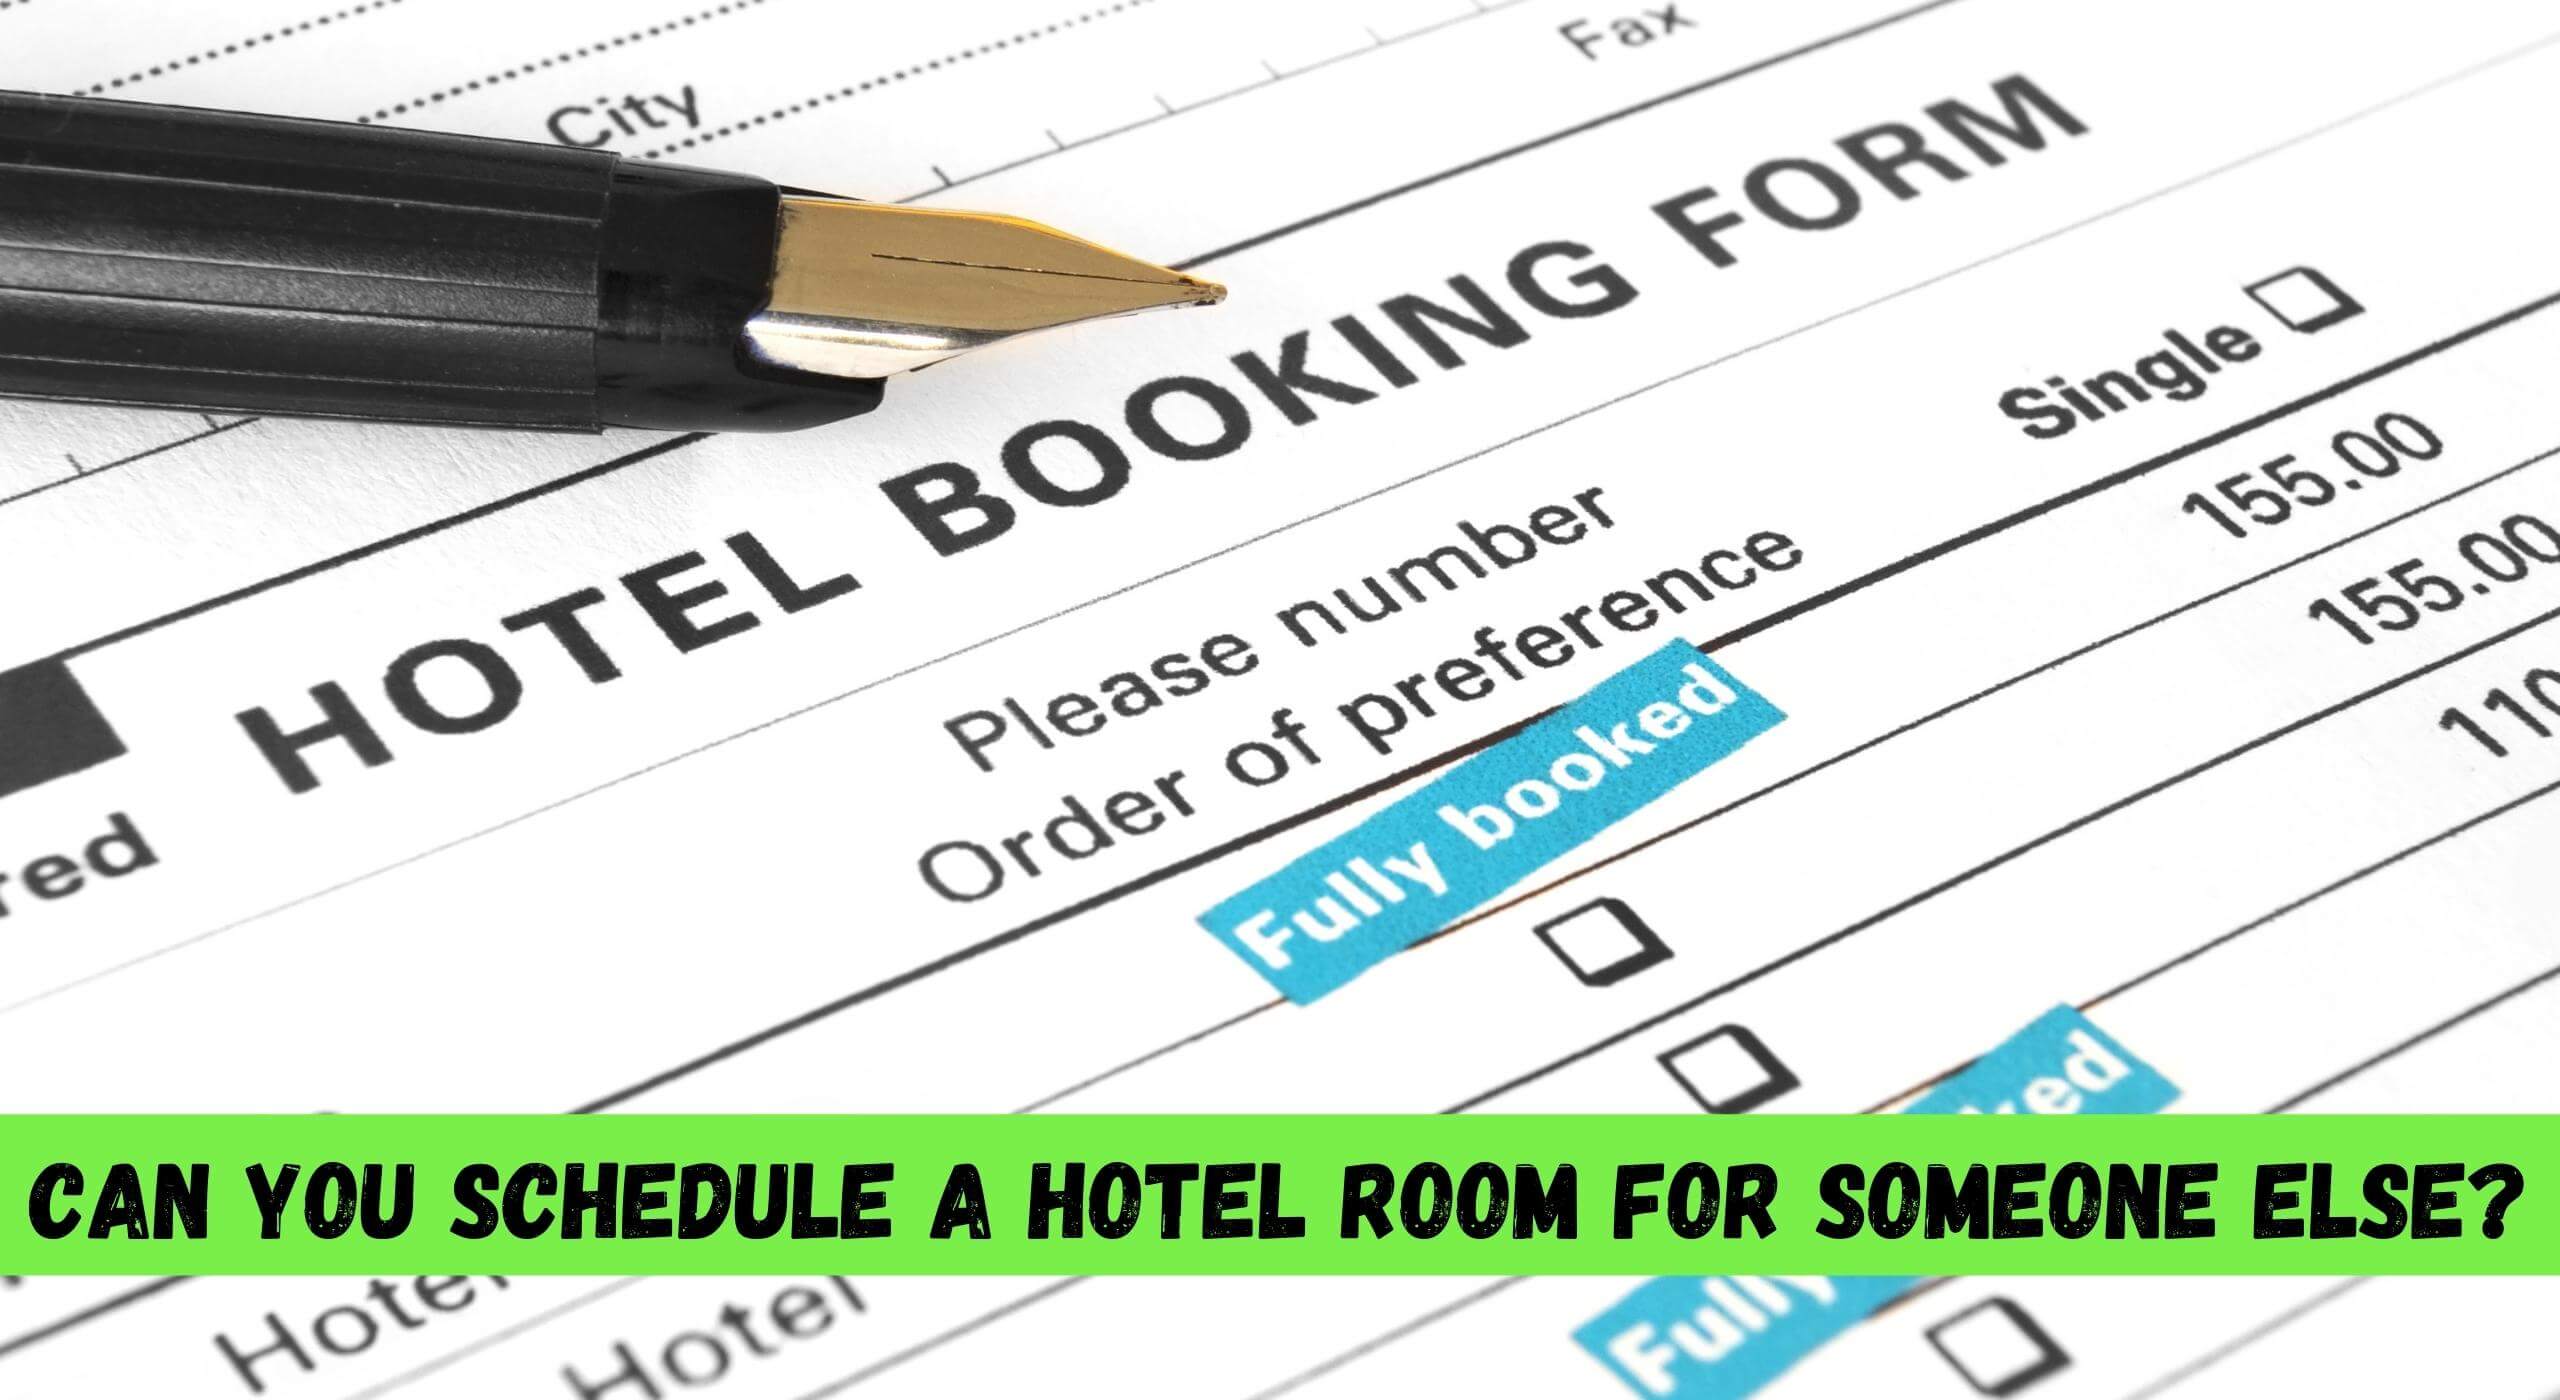 Can You Schedule A Hotel Room For Someone Else?